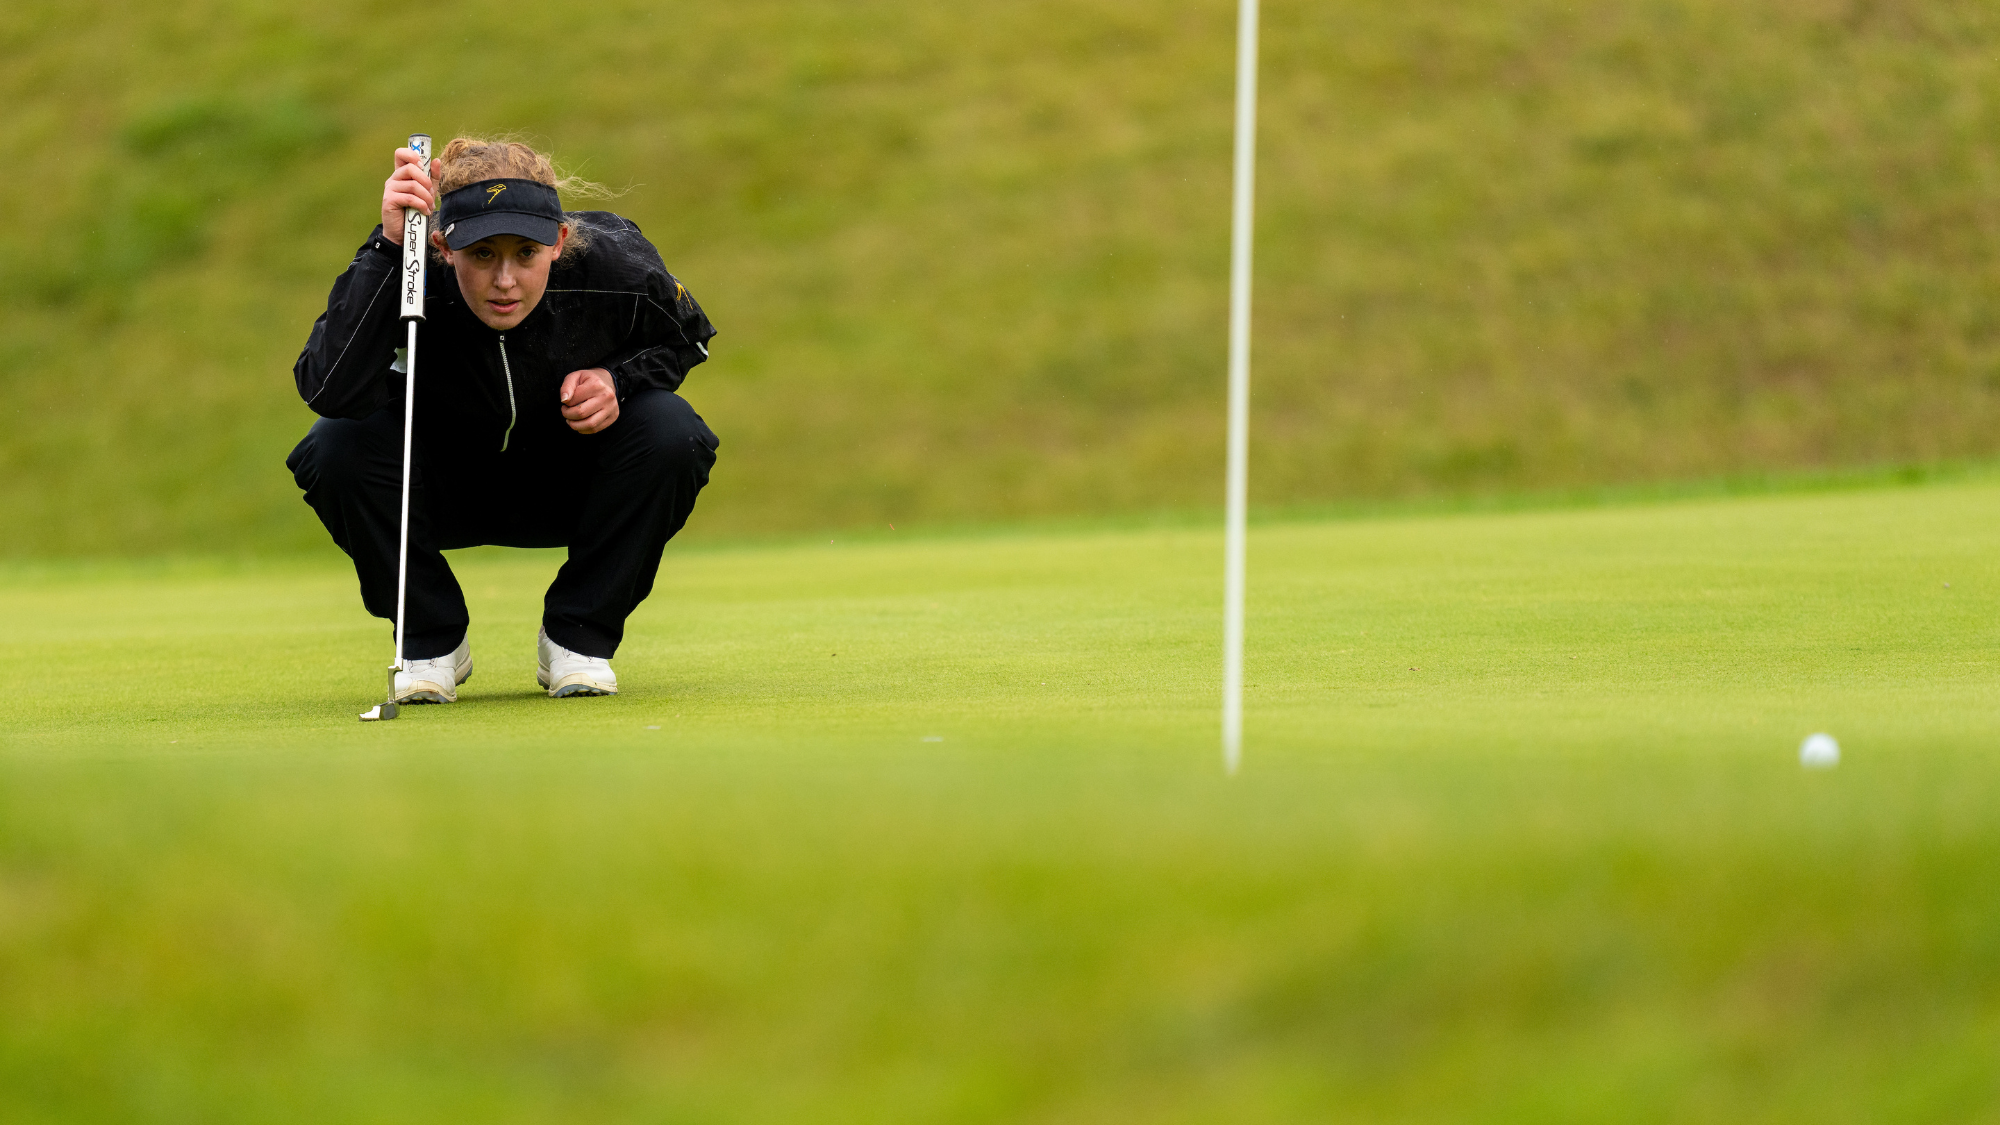 Woman in navy blue crouching on the golf course holding a golf club looking down and forward